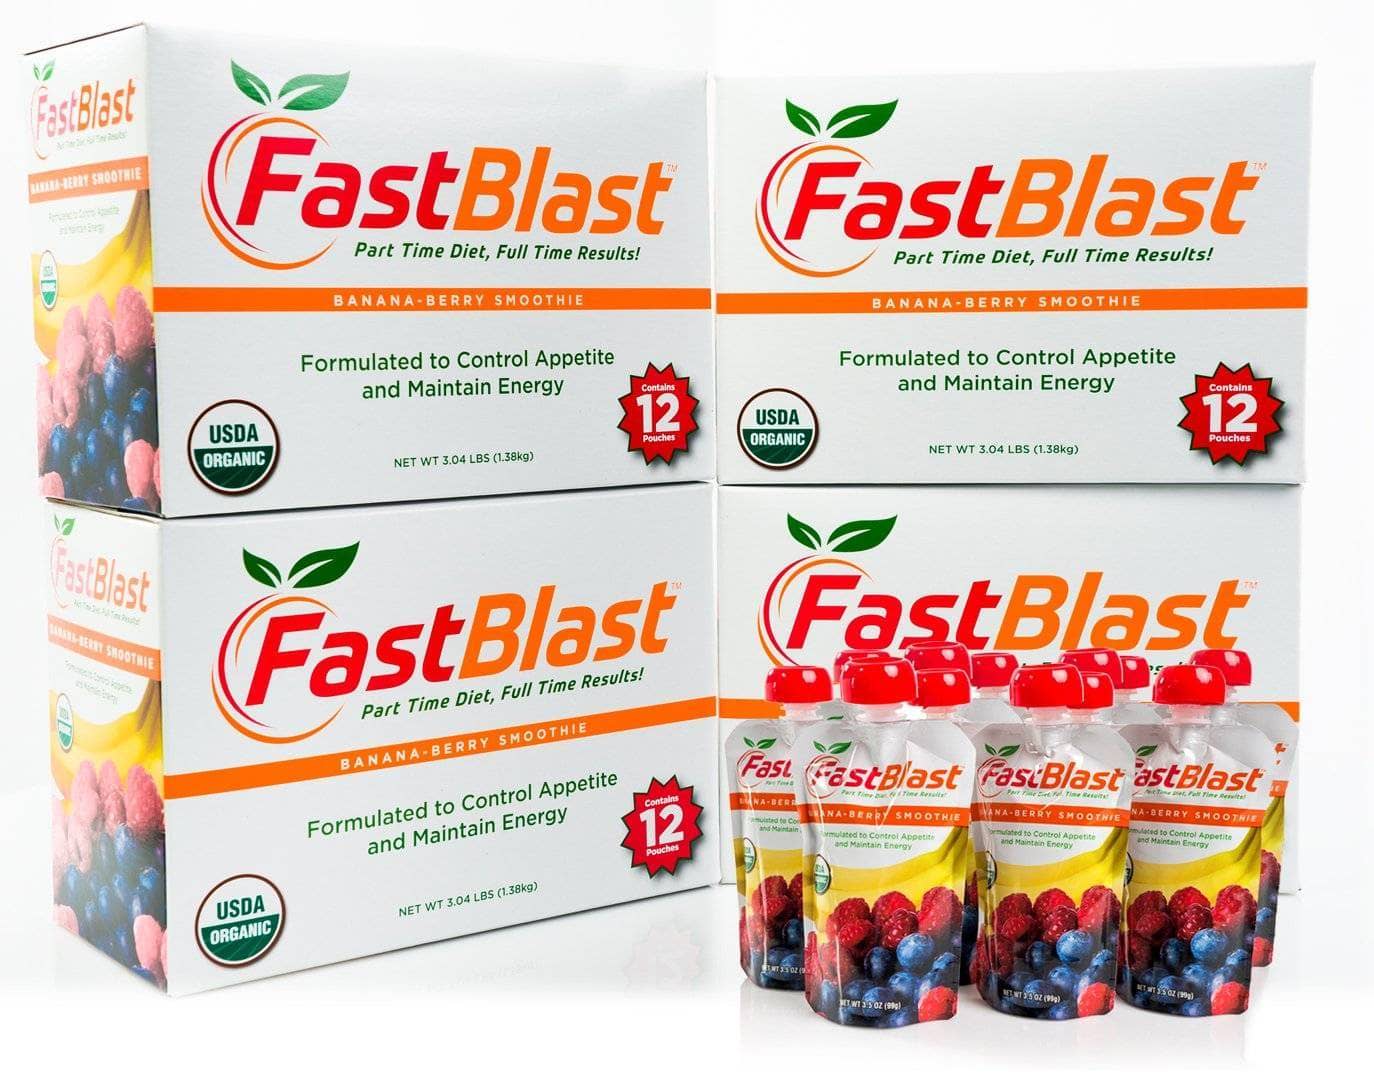 Fastblast smoothies come in convienient pouches you can take with you anywhere